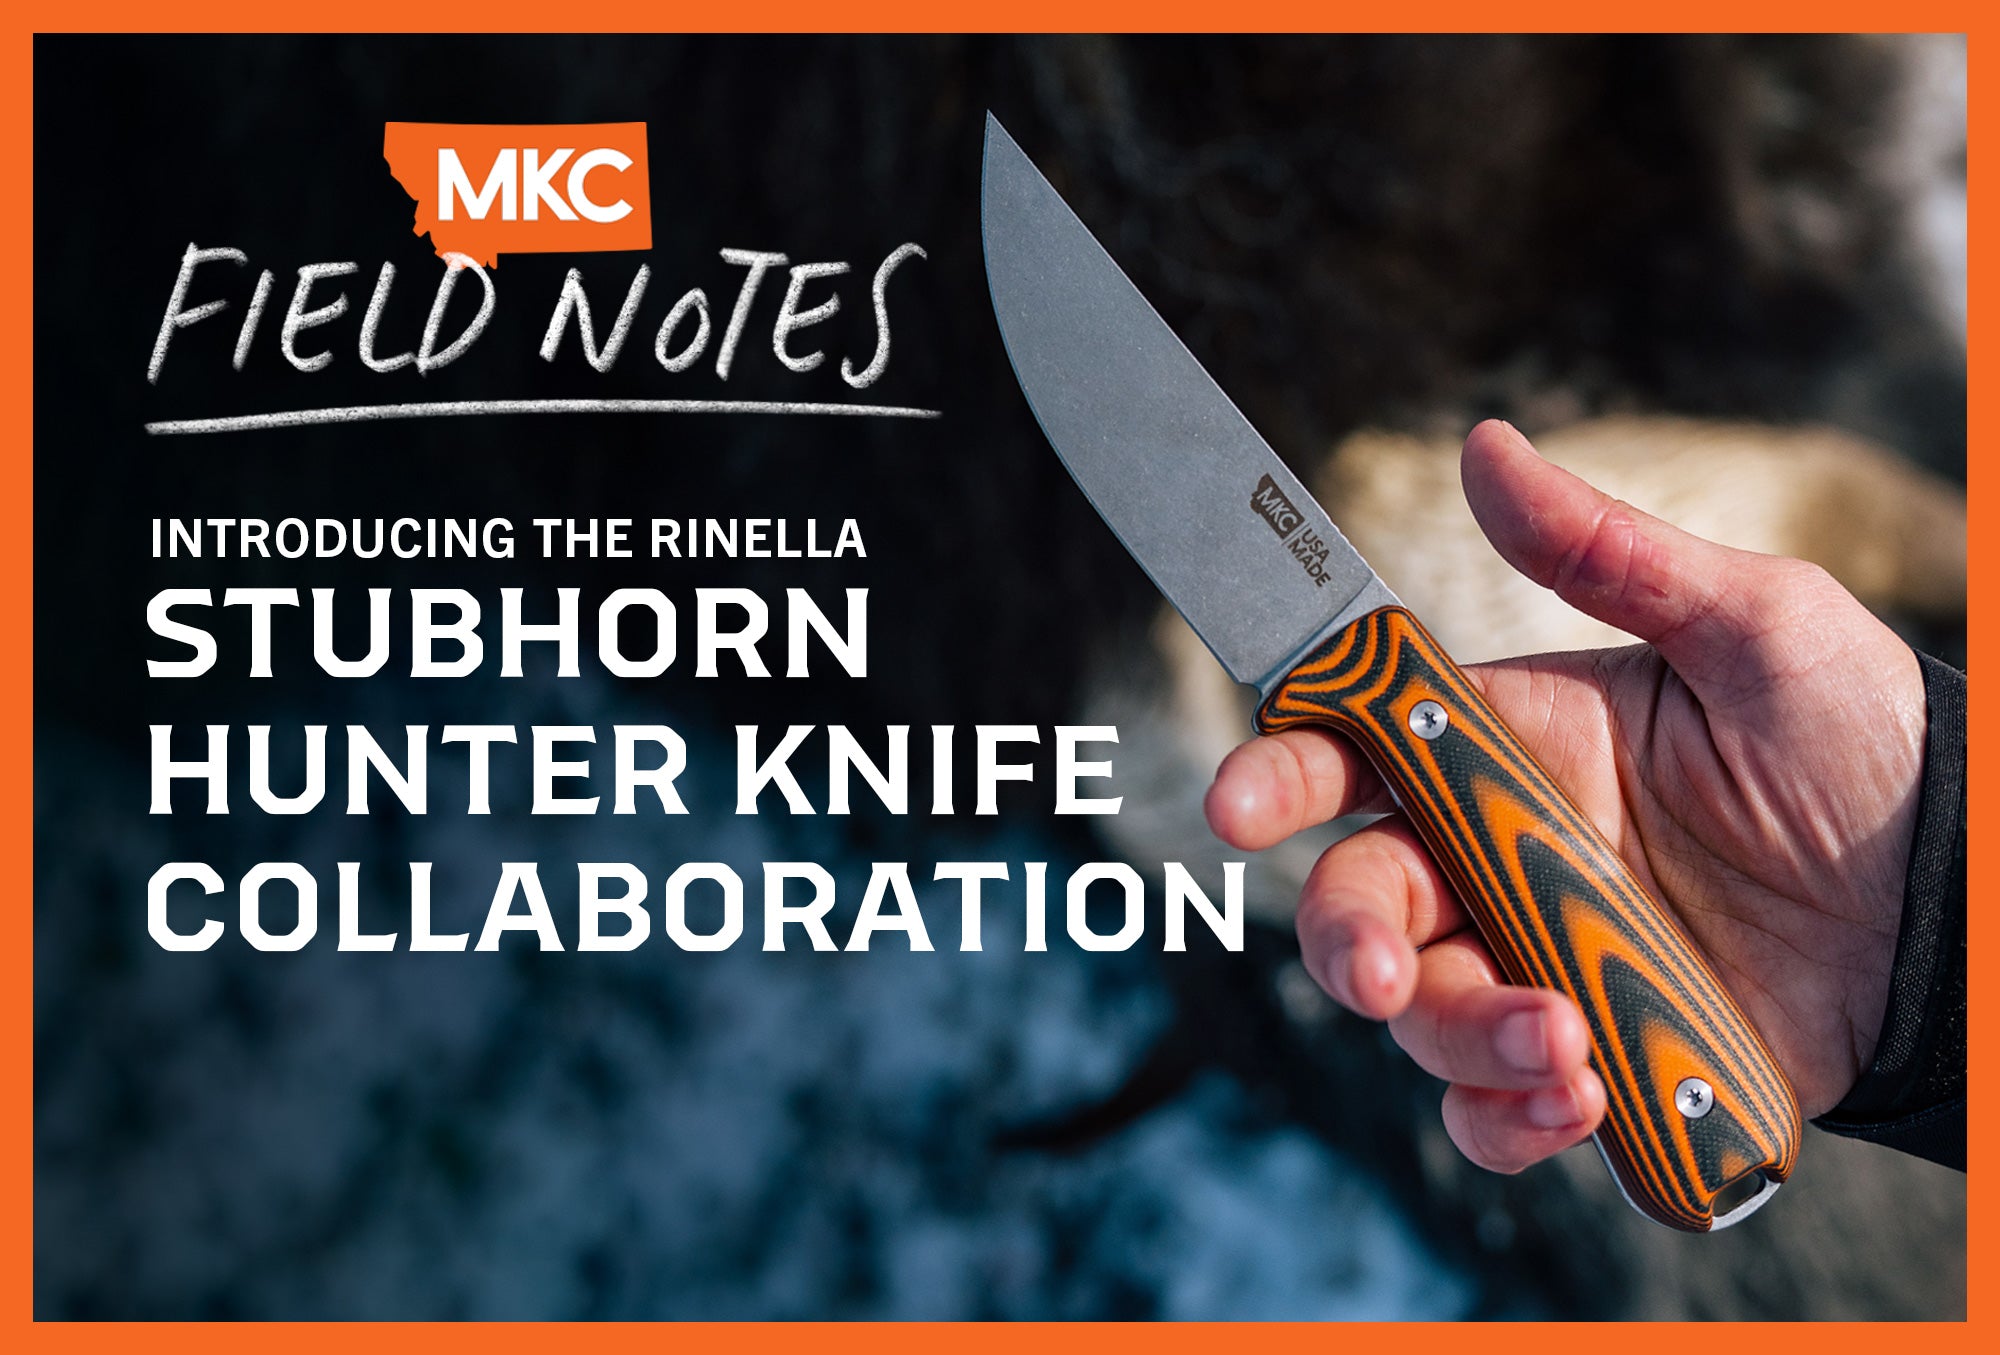 A close-up shot of someone holding the new Rinella Stubhorn knife collaboration.